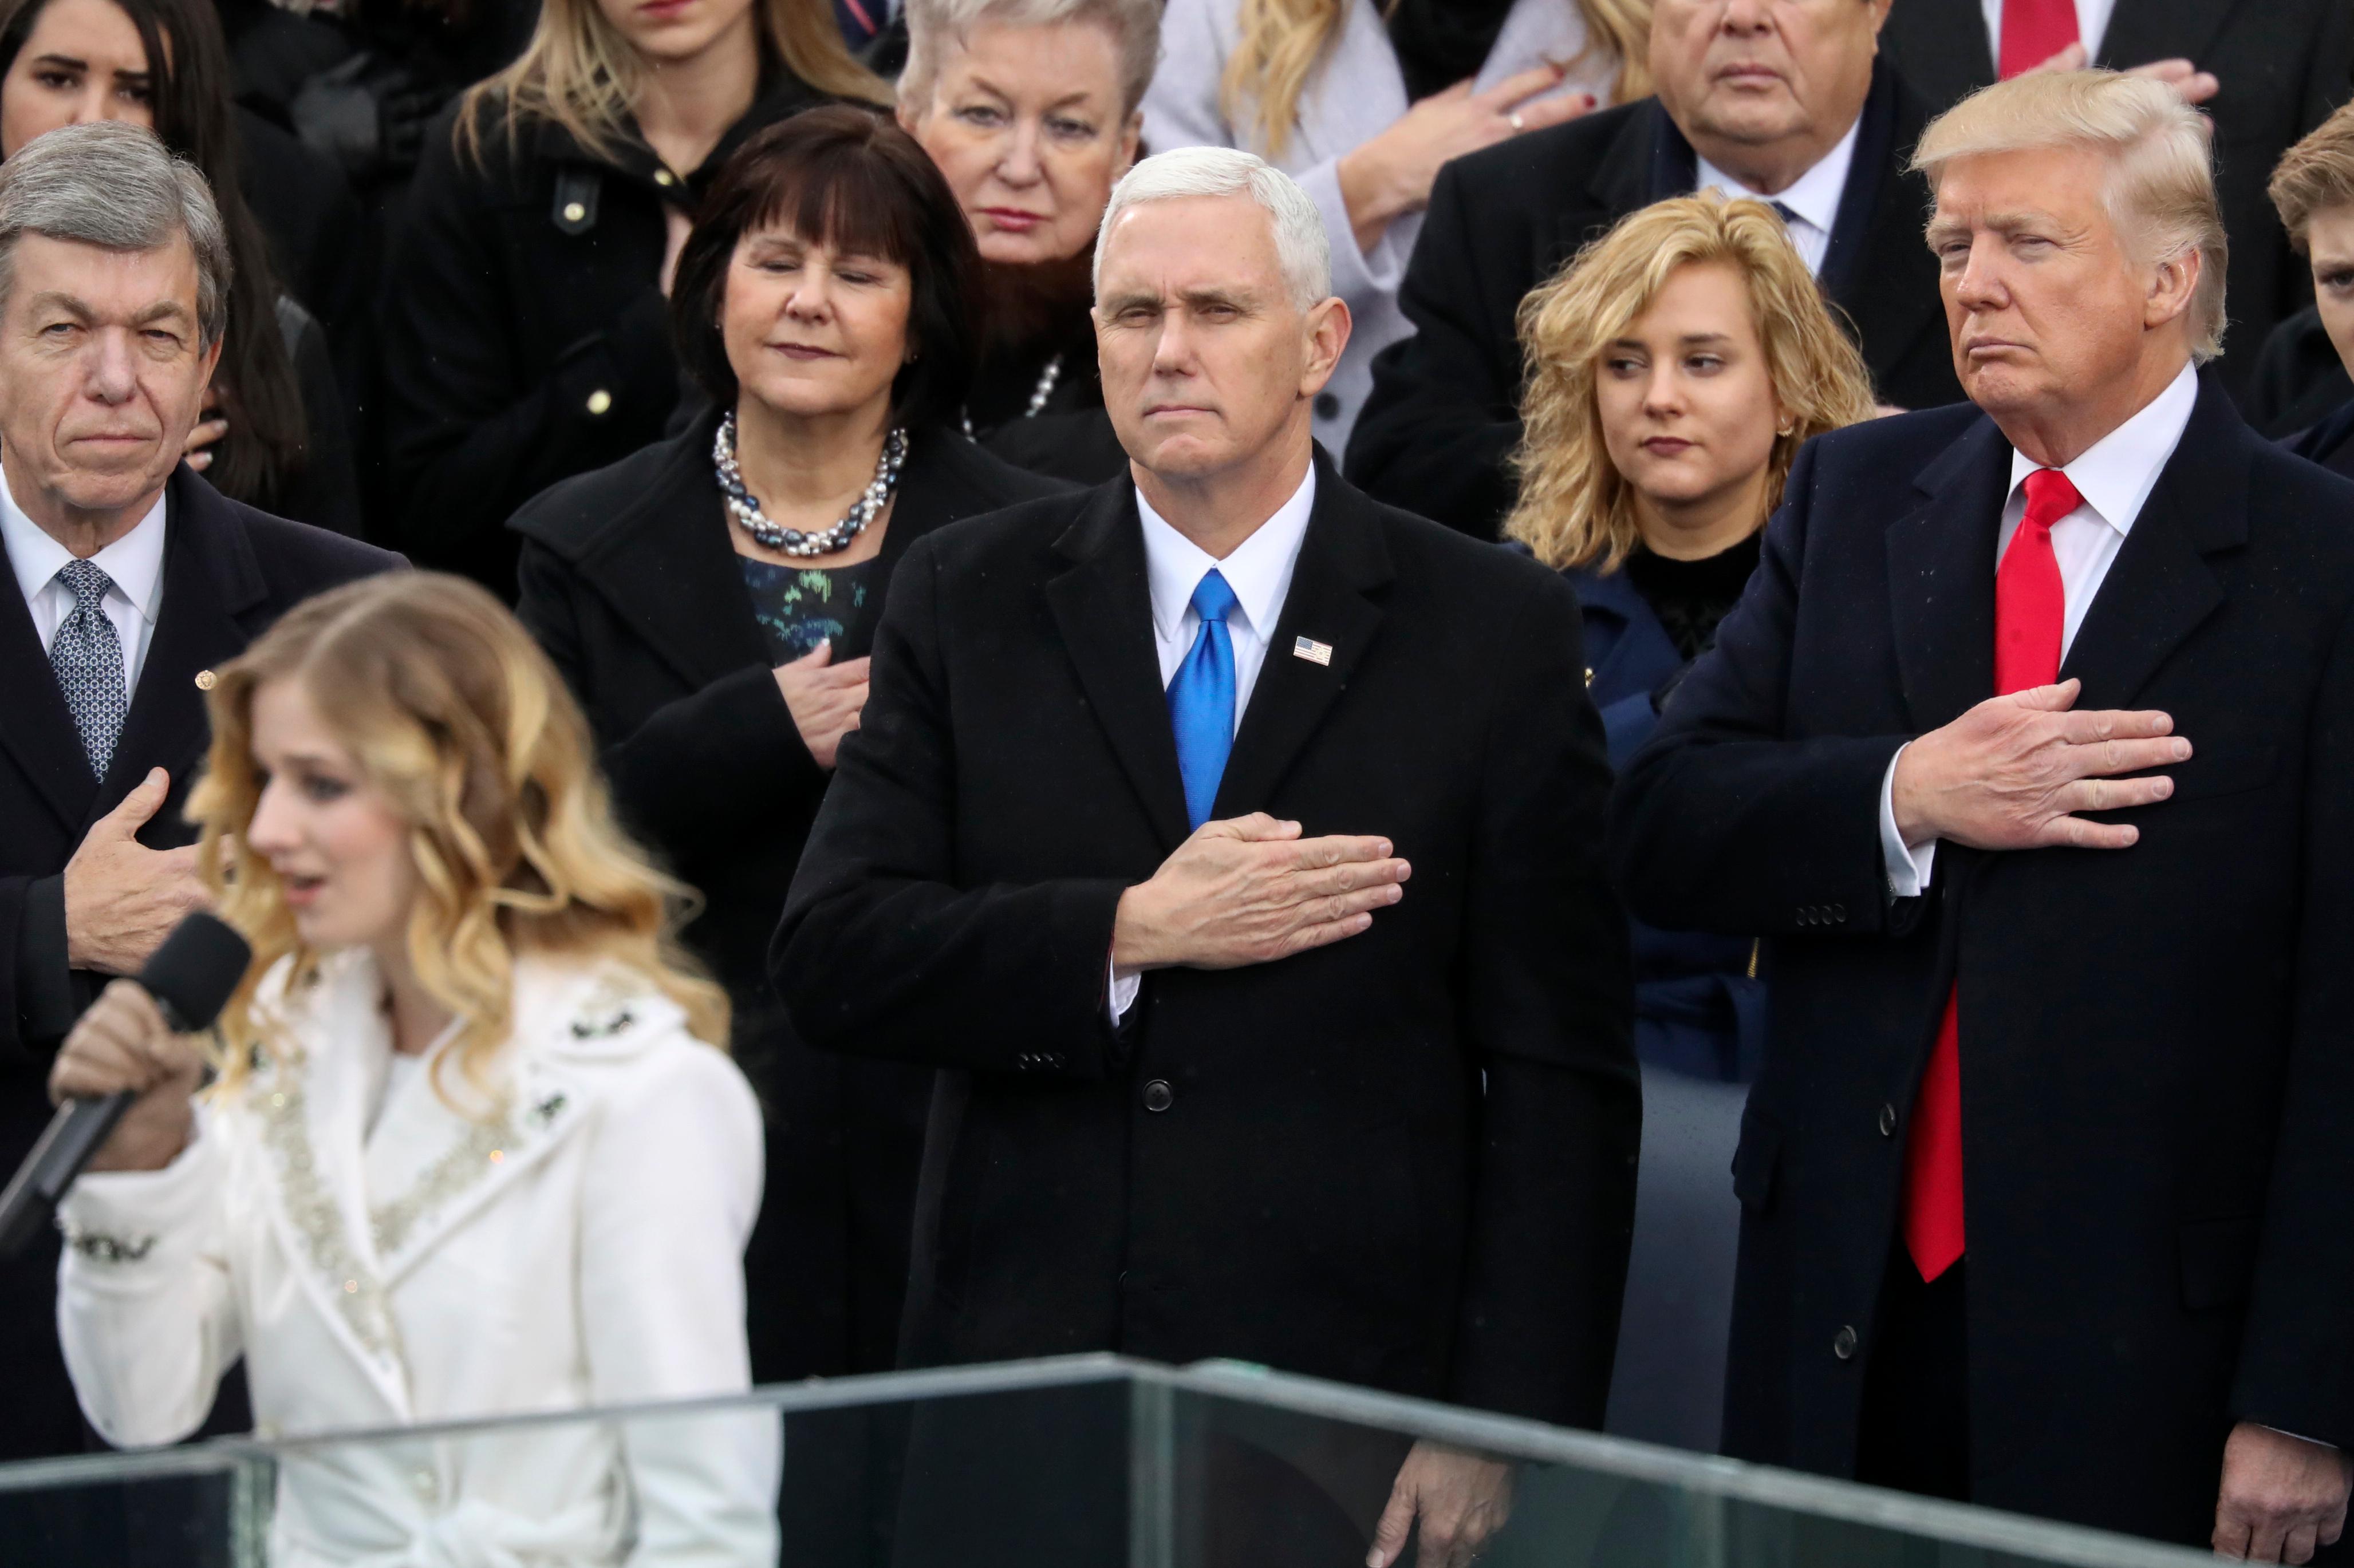 FILE - In this Jan. 20, 2017, file photo, Vice President Mike Pence and President Donald Trump listen to the singing of the national anthem by Jackie Evancho during the 58th Presidential Inauguration at the U.S. Capitol in Washington. Evancho asked Trump in a tweet on Feb. 22, 2017,   to meet with her and her transgender sister on transgender rights. (AP Photo/Andrew Harnik, File)